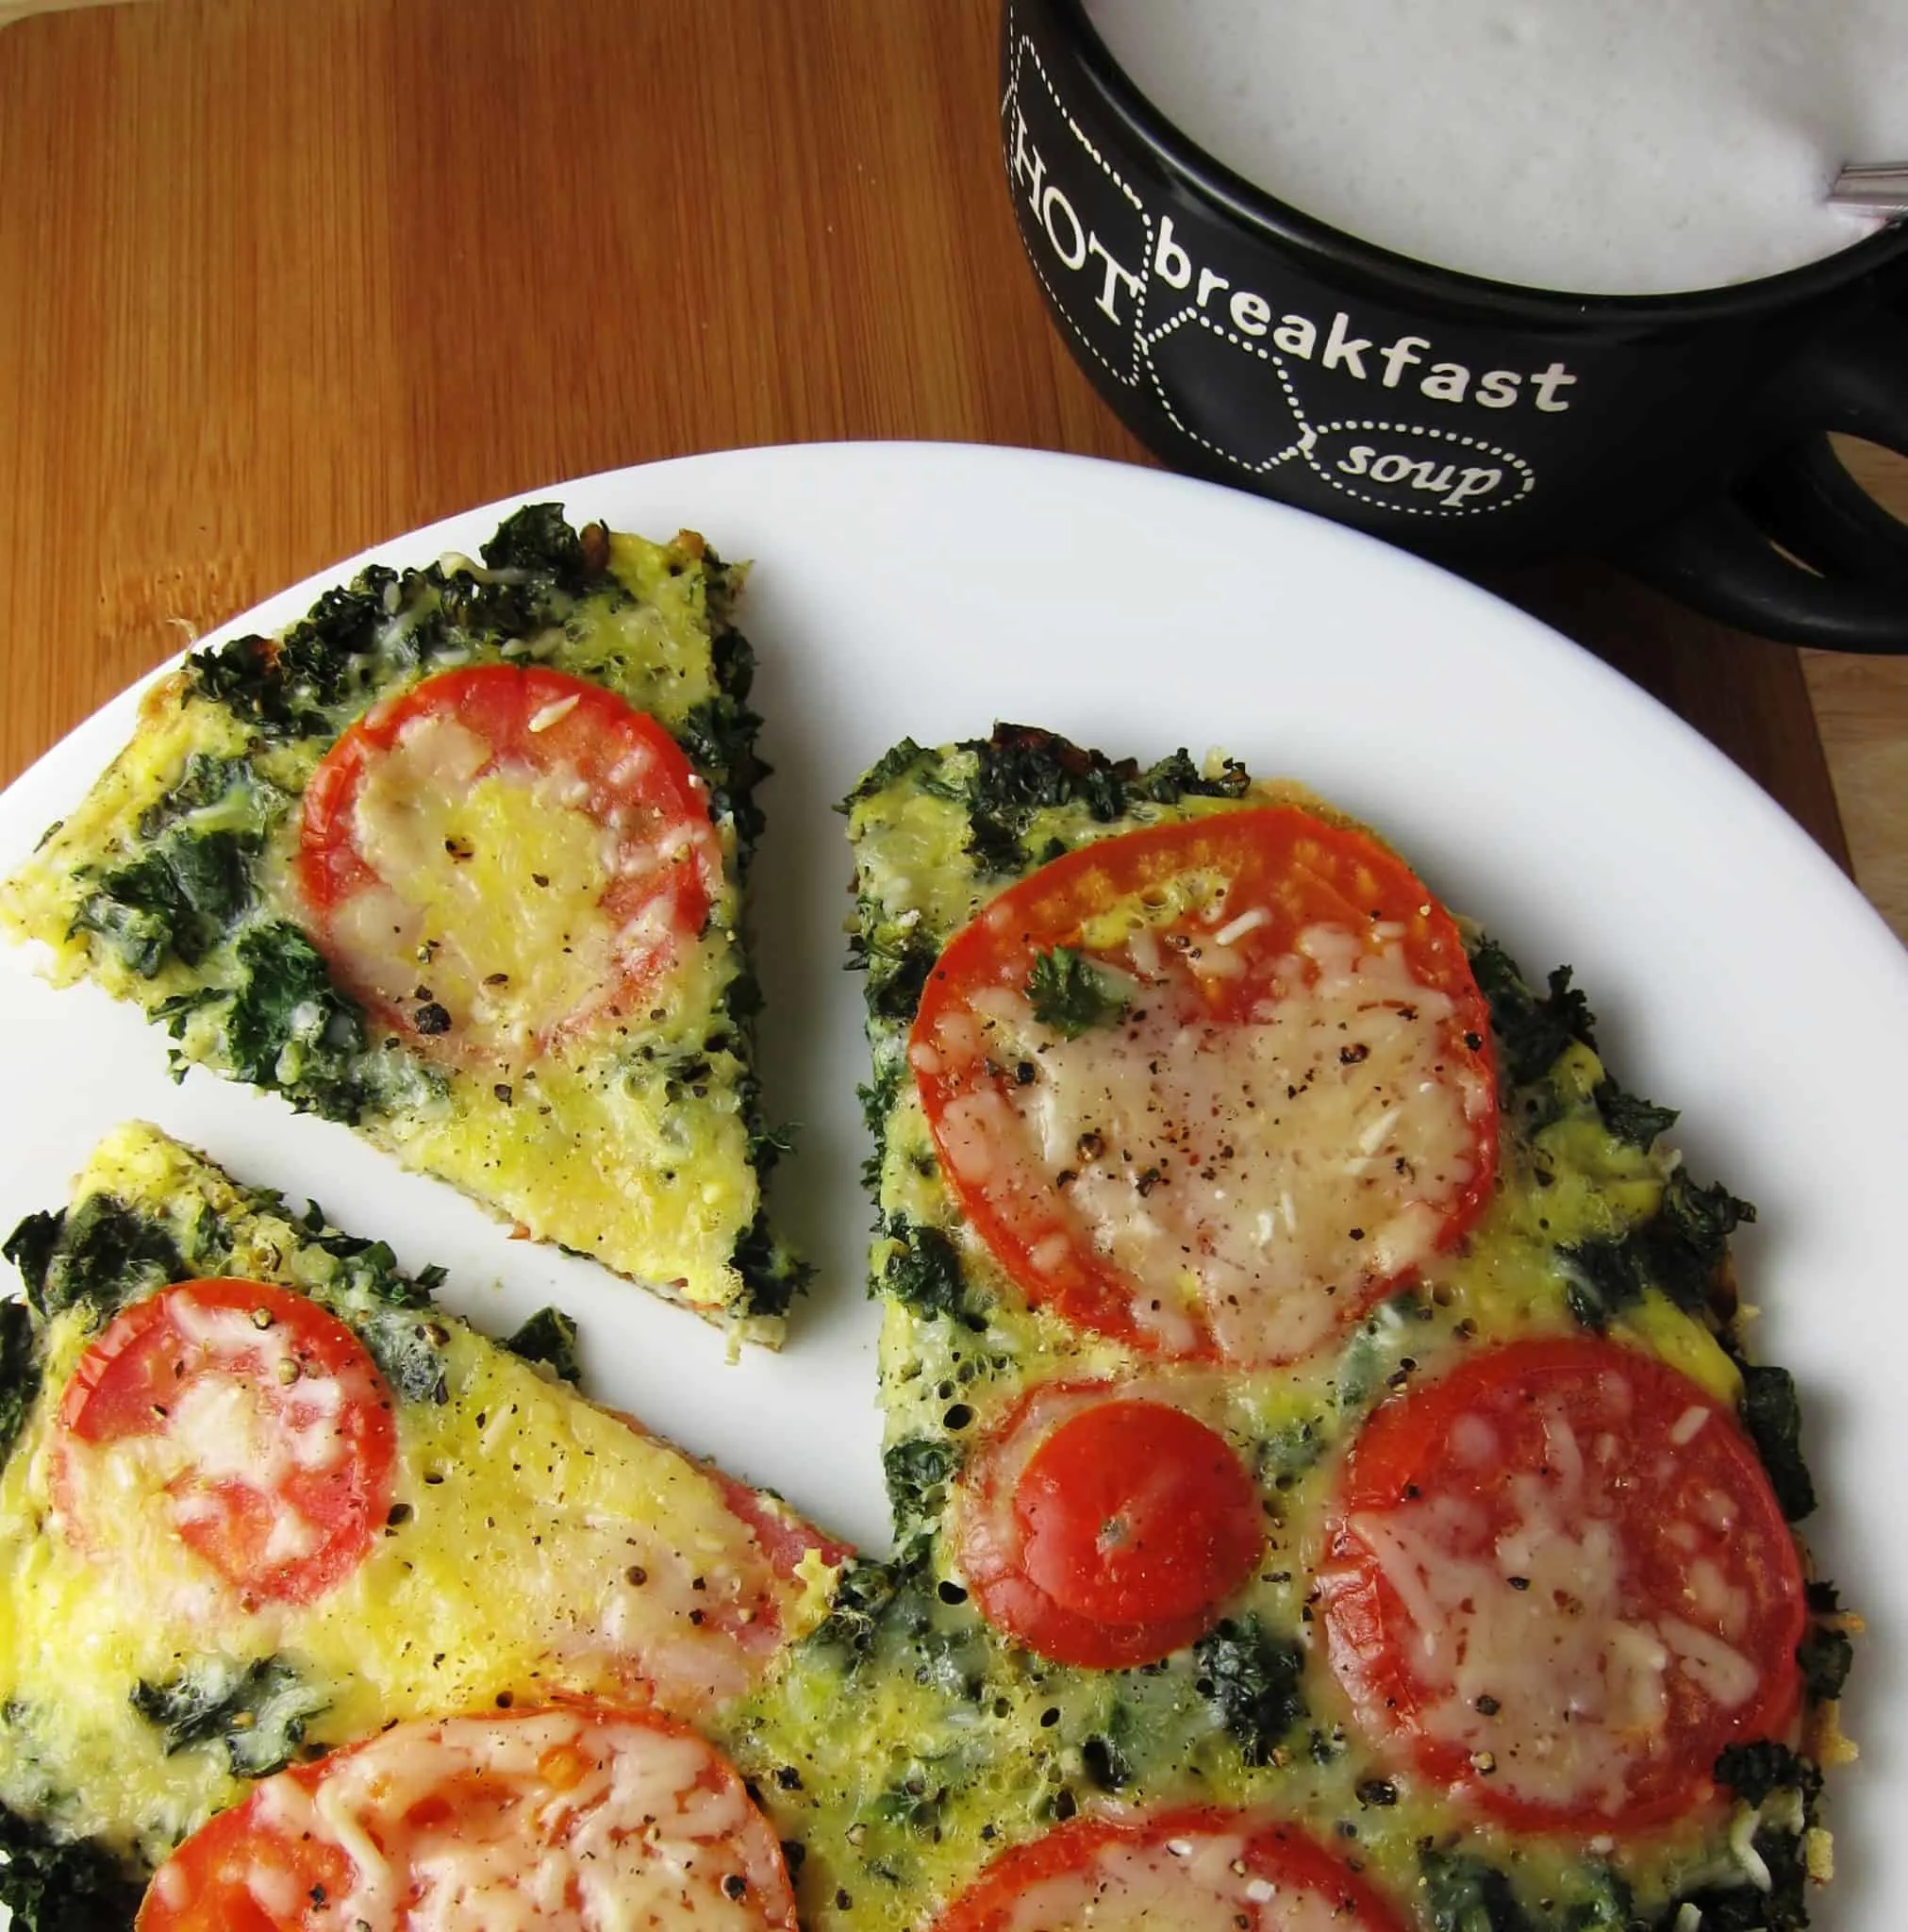 No bake frittata with a cup of coffee.